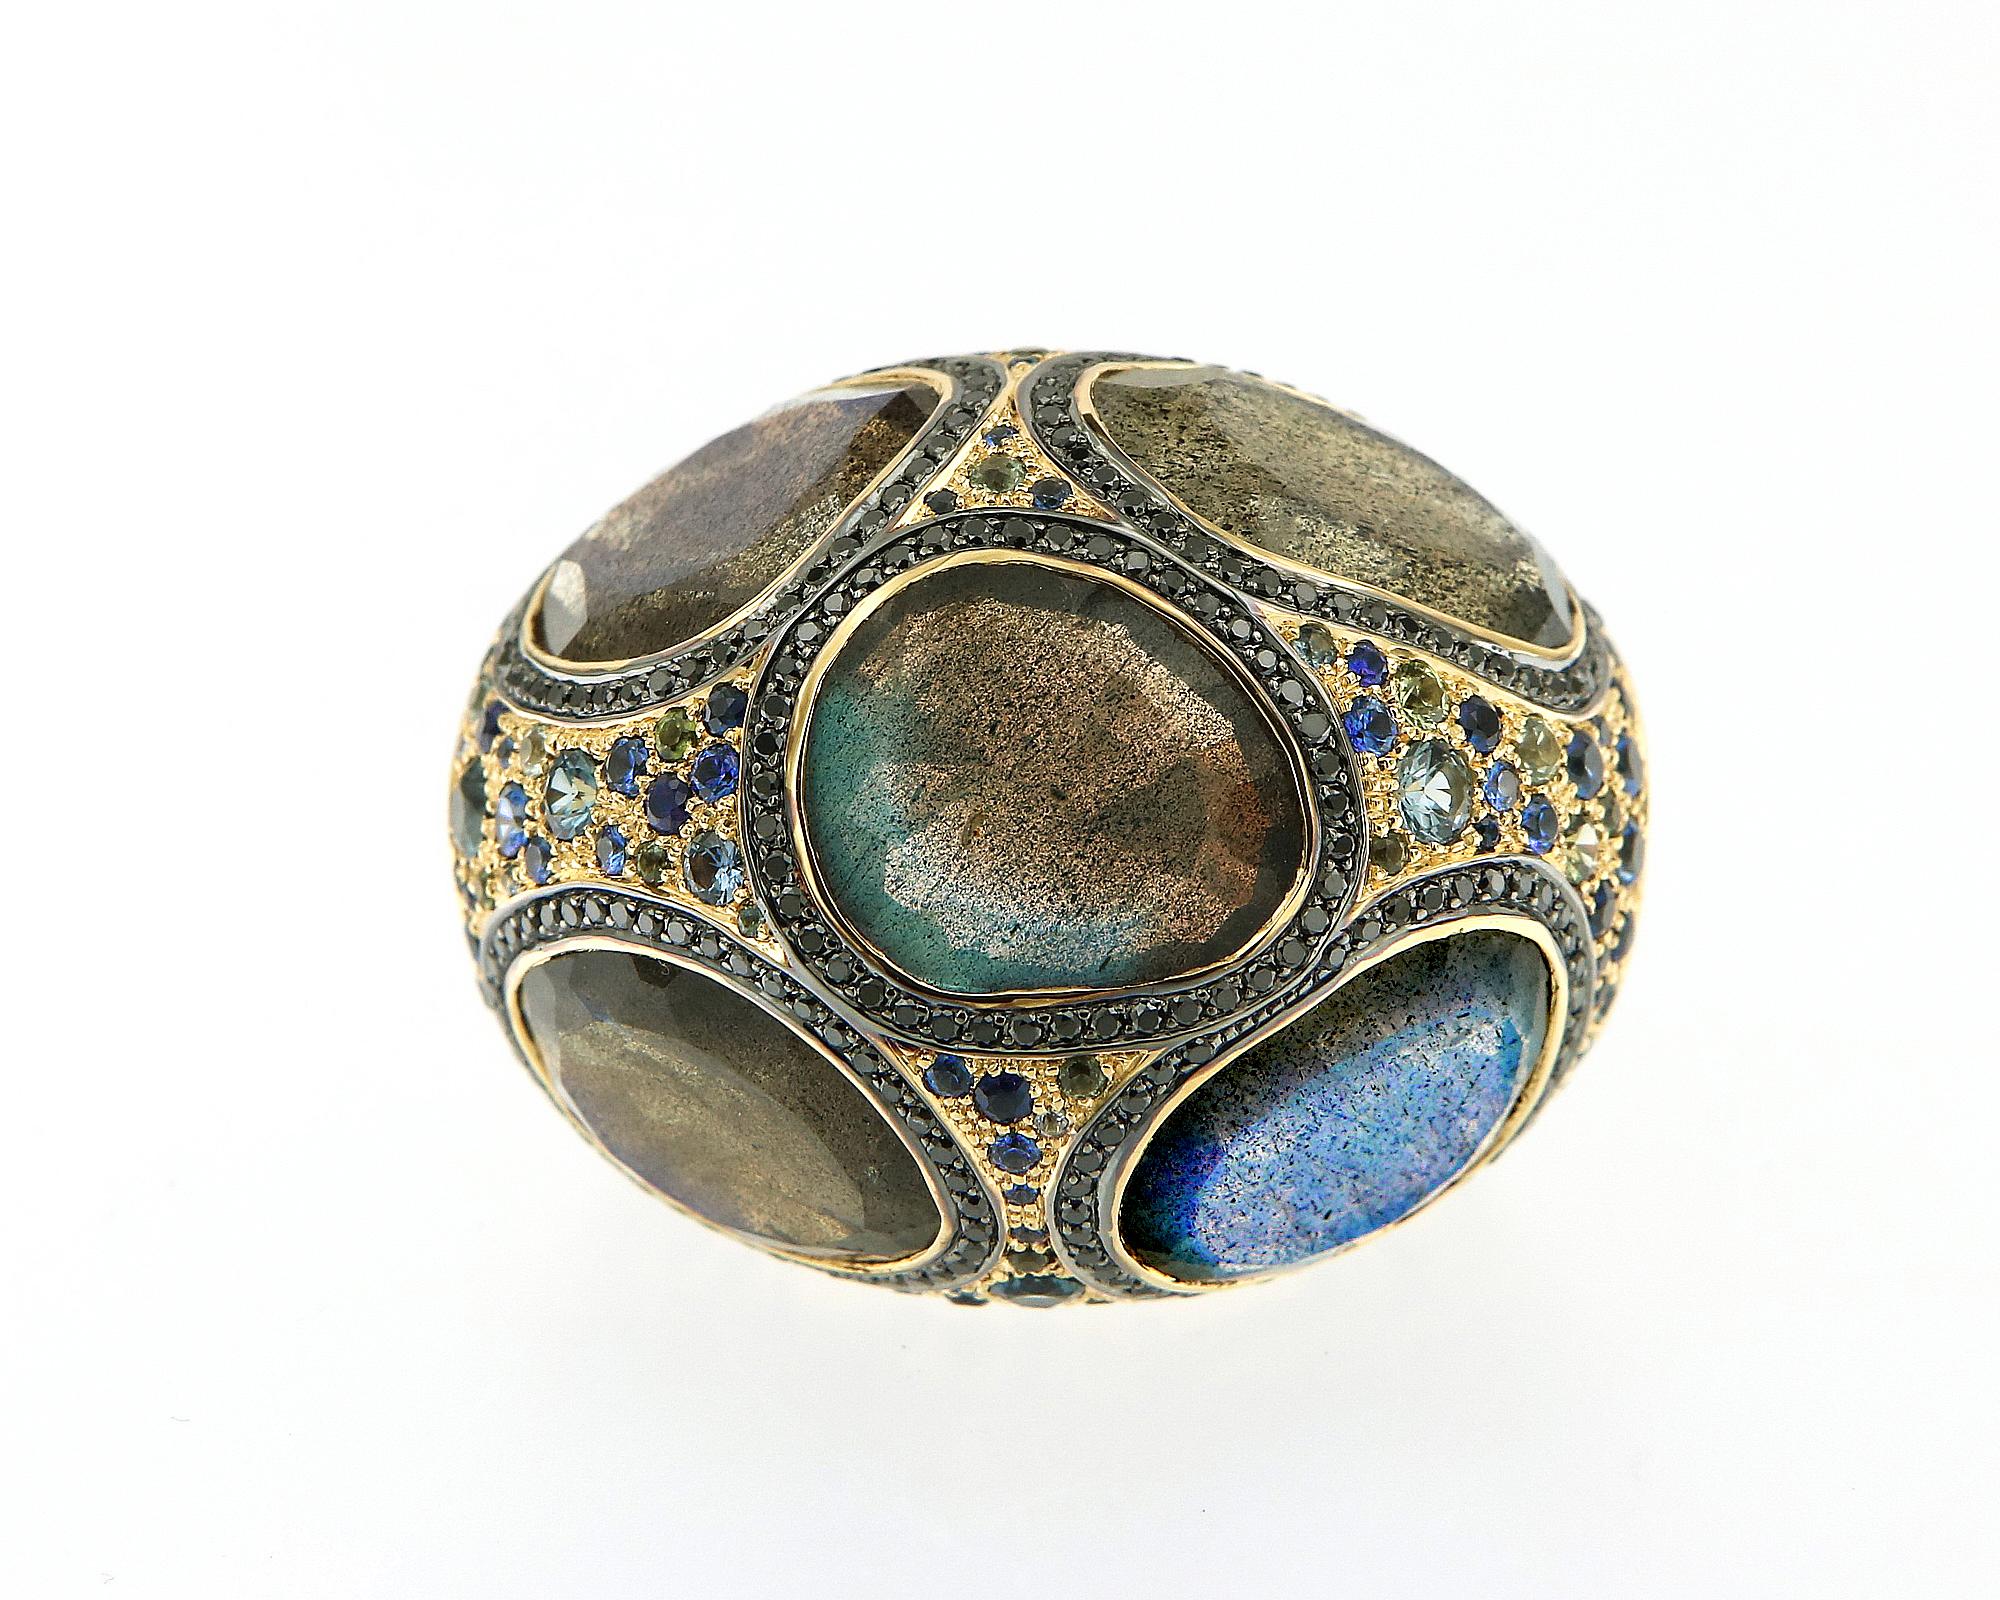 This bohemian glam ring is created with 18k yellow gold and showcases beautiful free form labradorite weighing 16.54 carats in the design. Blue and green sapphires liberally splashed around the surface of the dome, creating a beautiful and sparkling